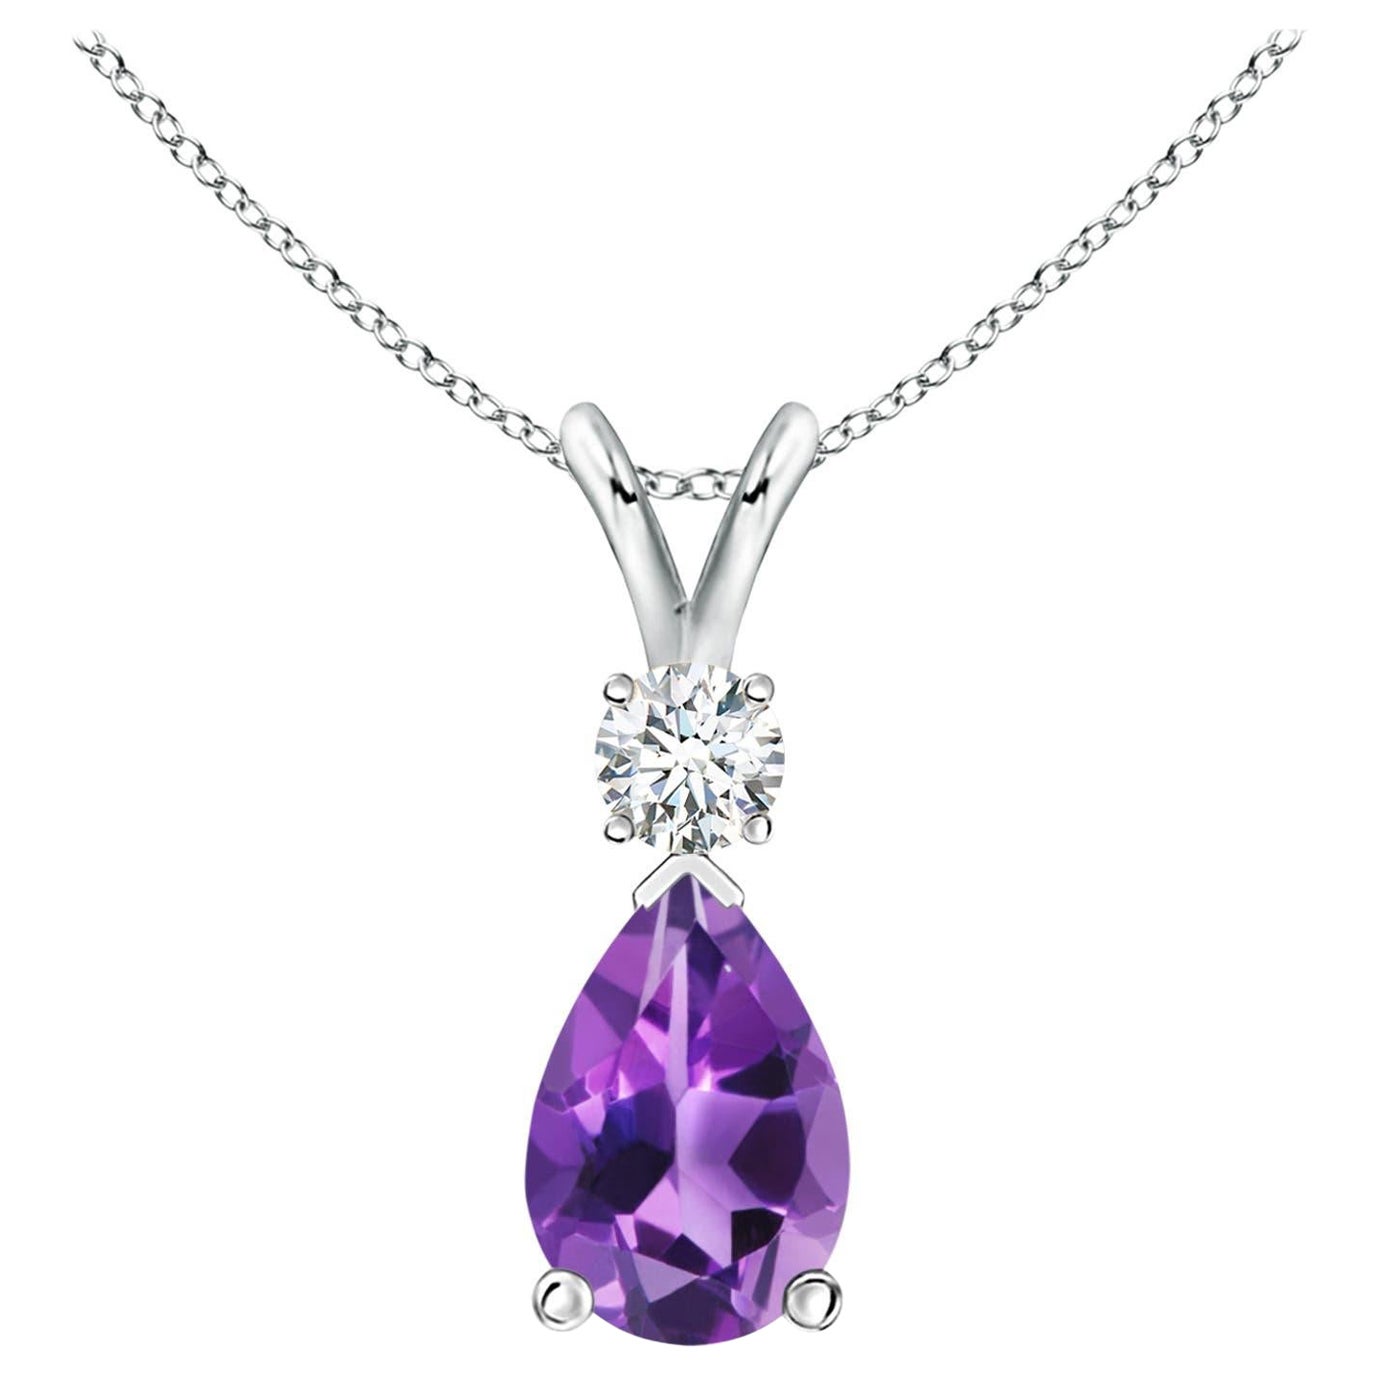 Natural 2.6 ct Amethyst Teardrop Pendant with Diamond in 14K White Gold